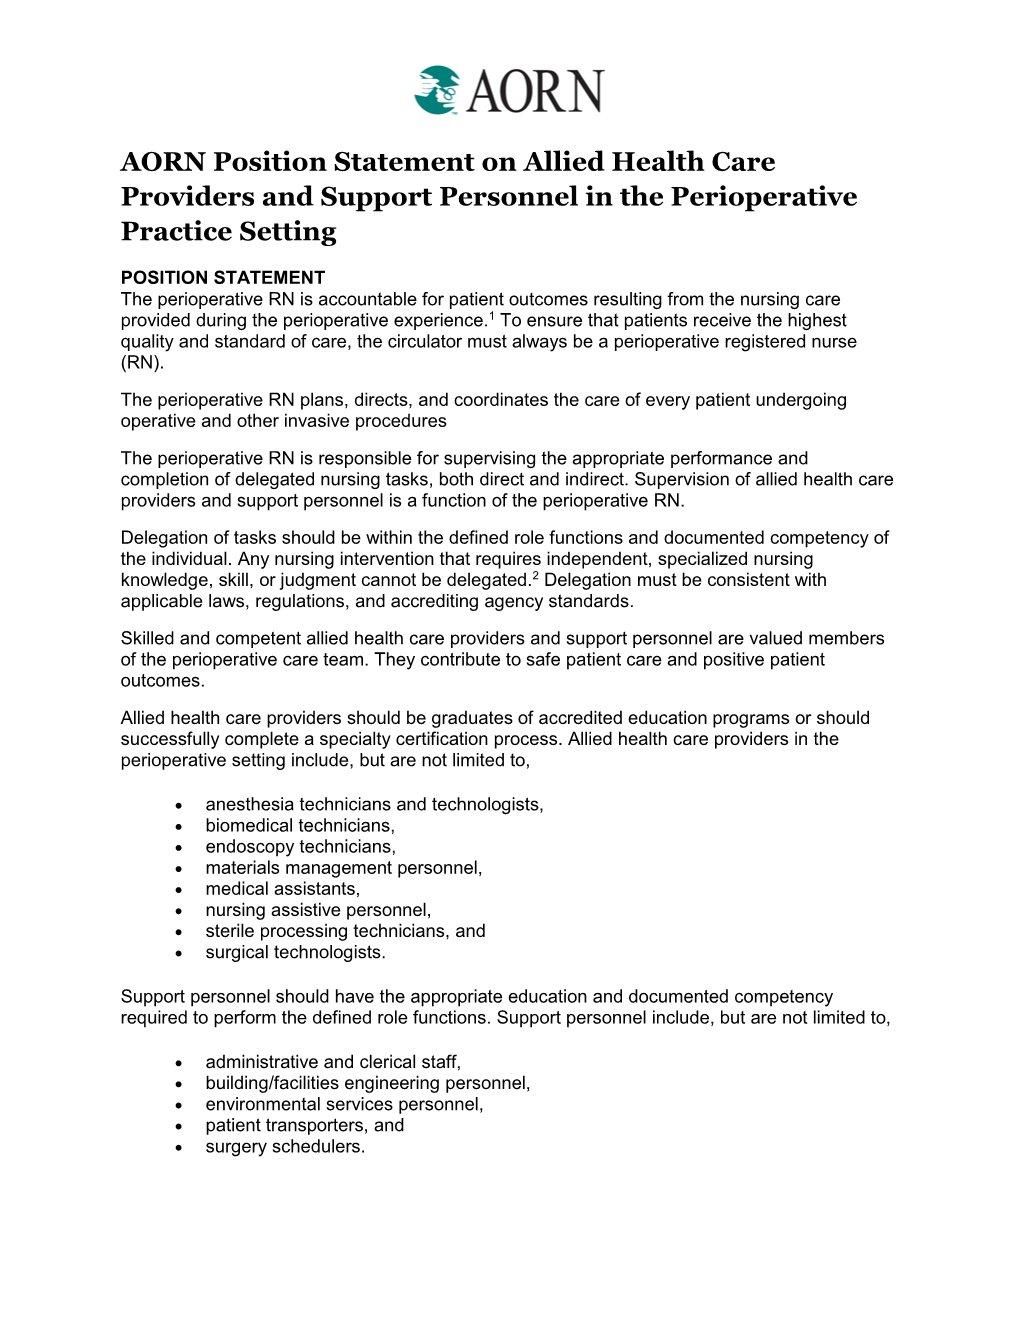 AORN Position Statement on Allied Health Care Providers and Support Personnel in the Perioperative Practice Setting